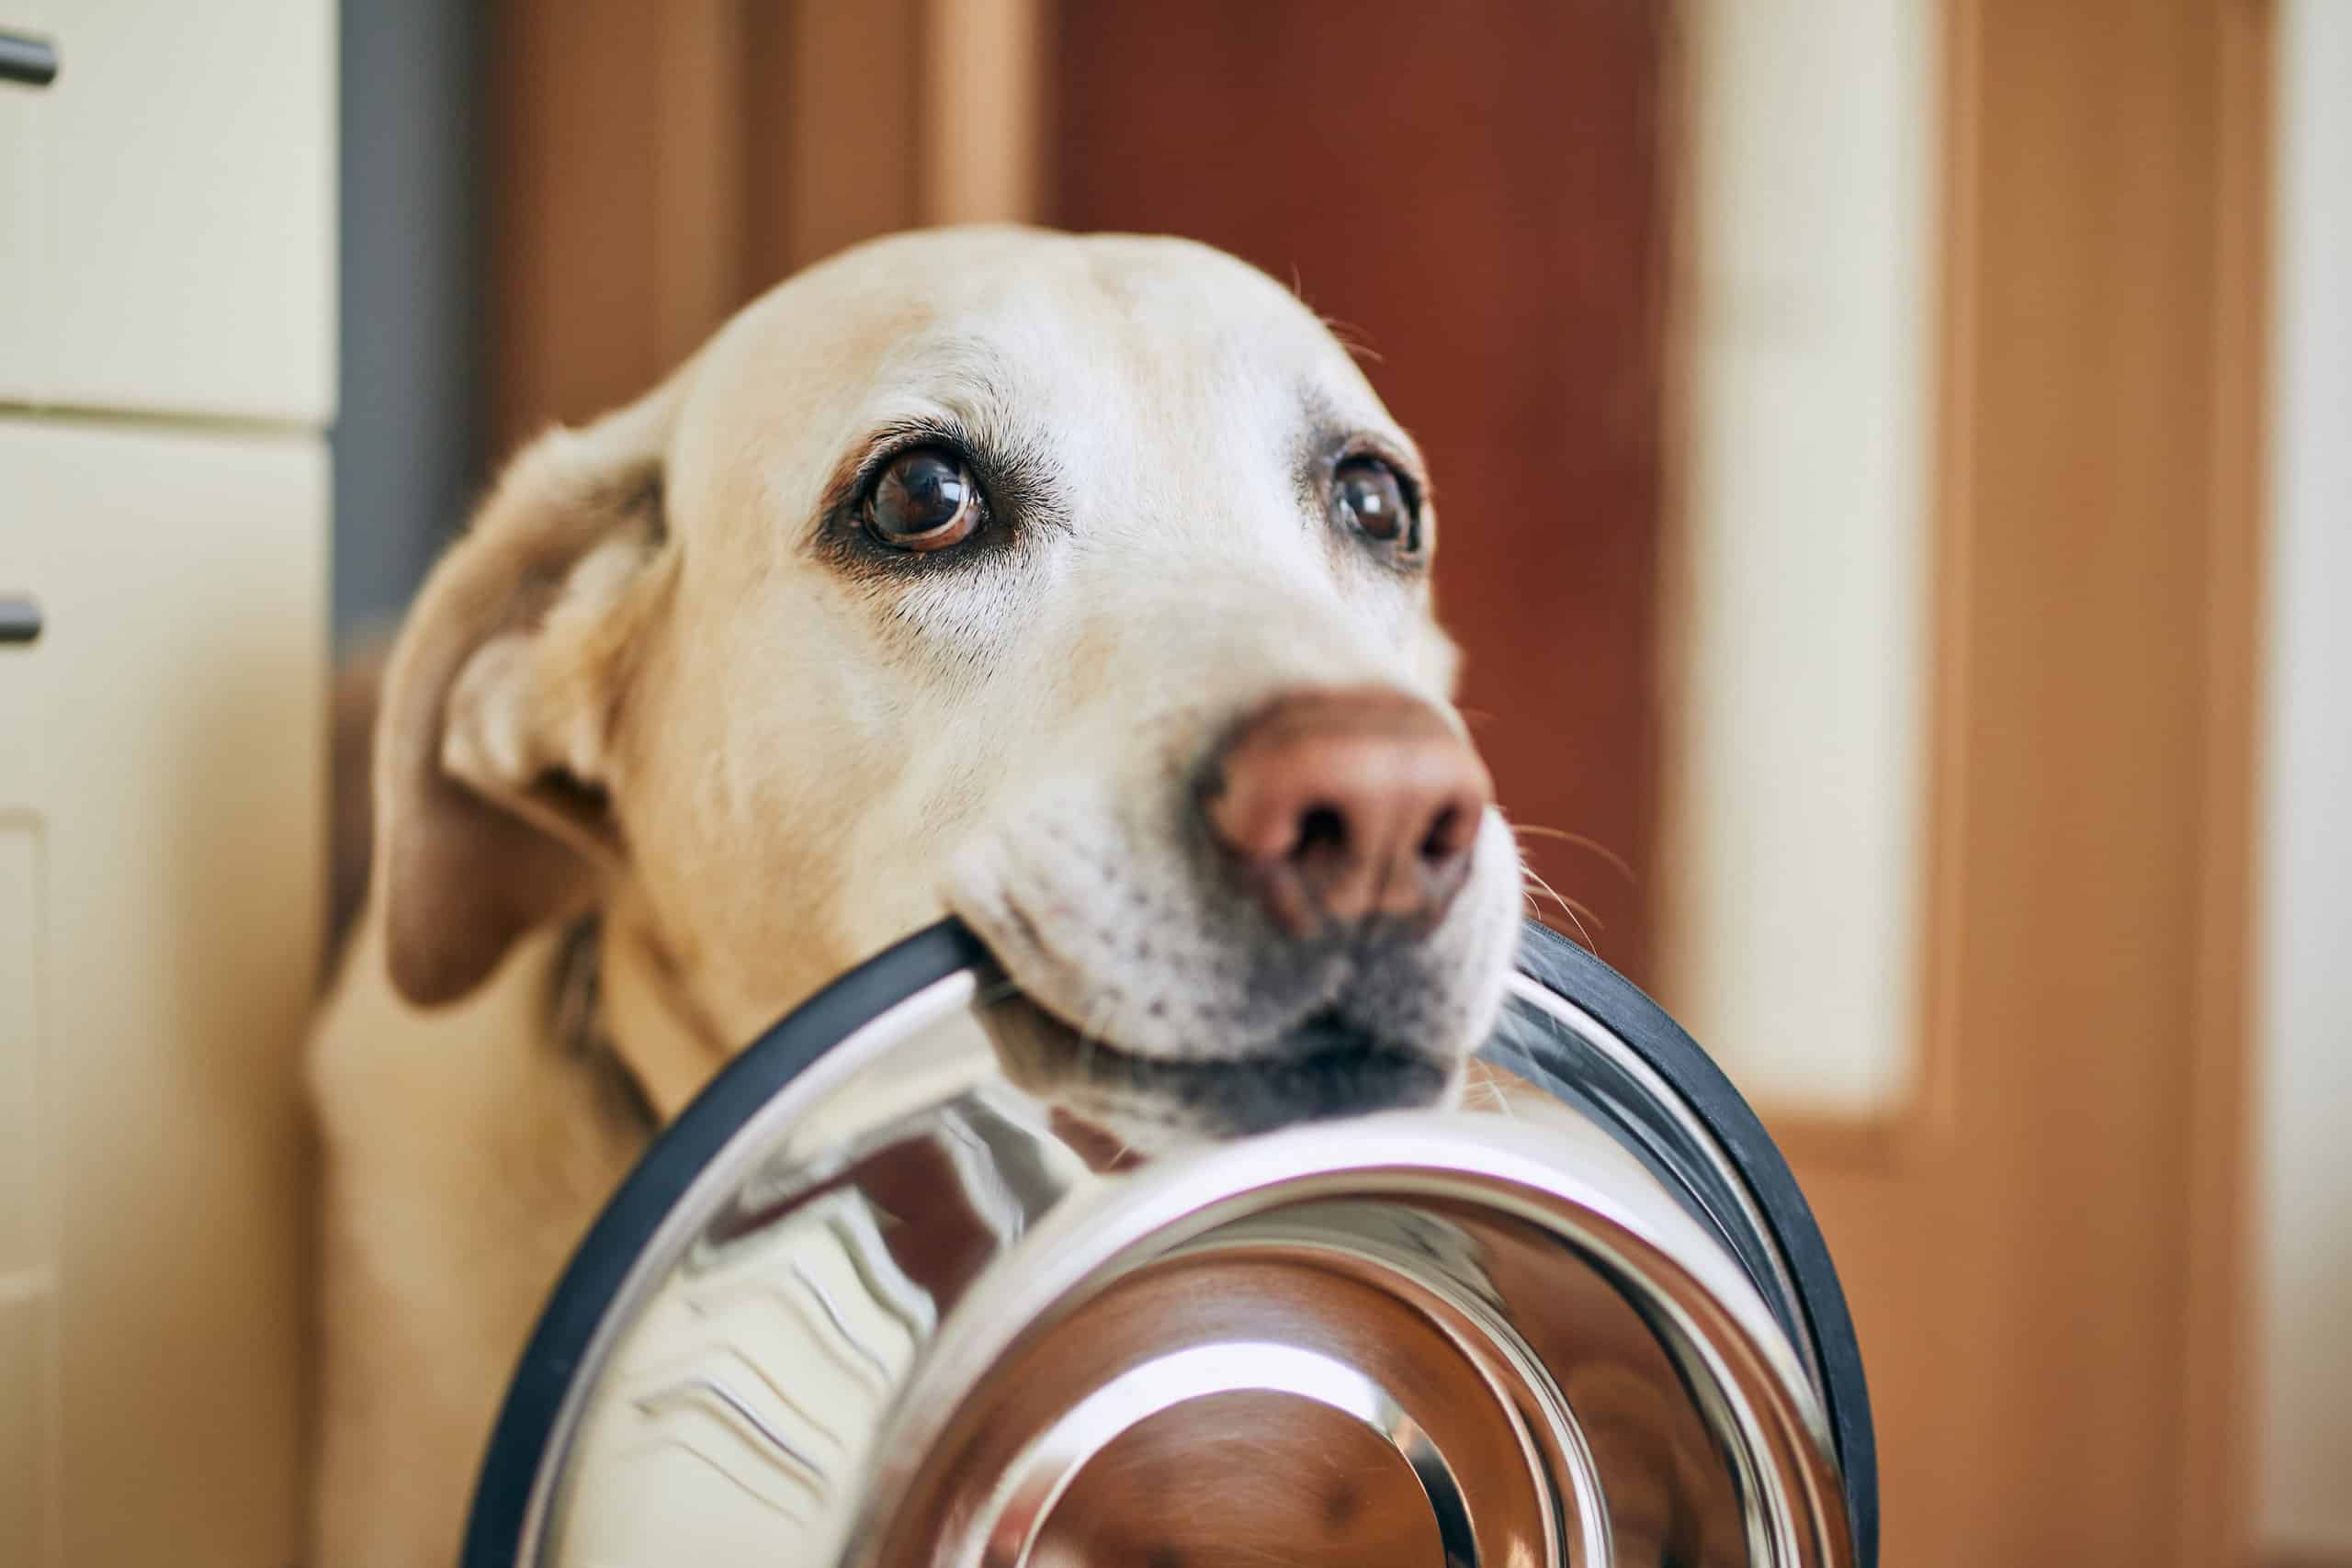 Labrador retriever, looking hungry, holding dog bowl in his mouth.